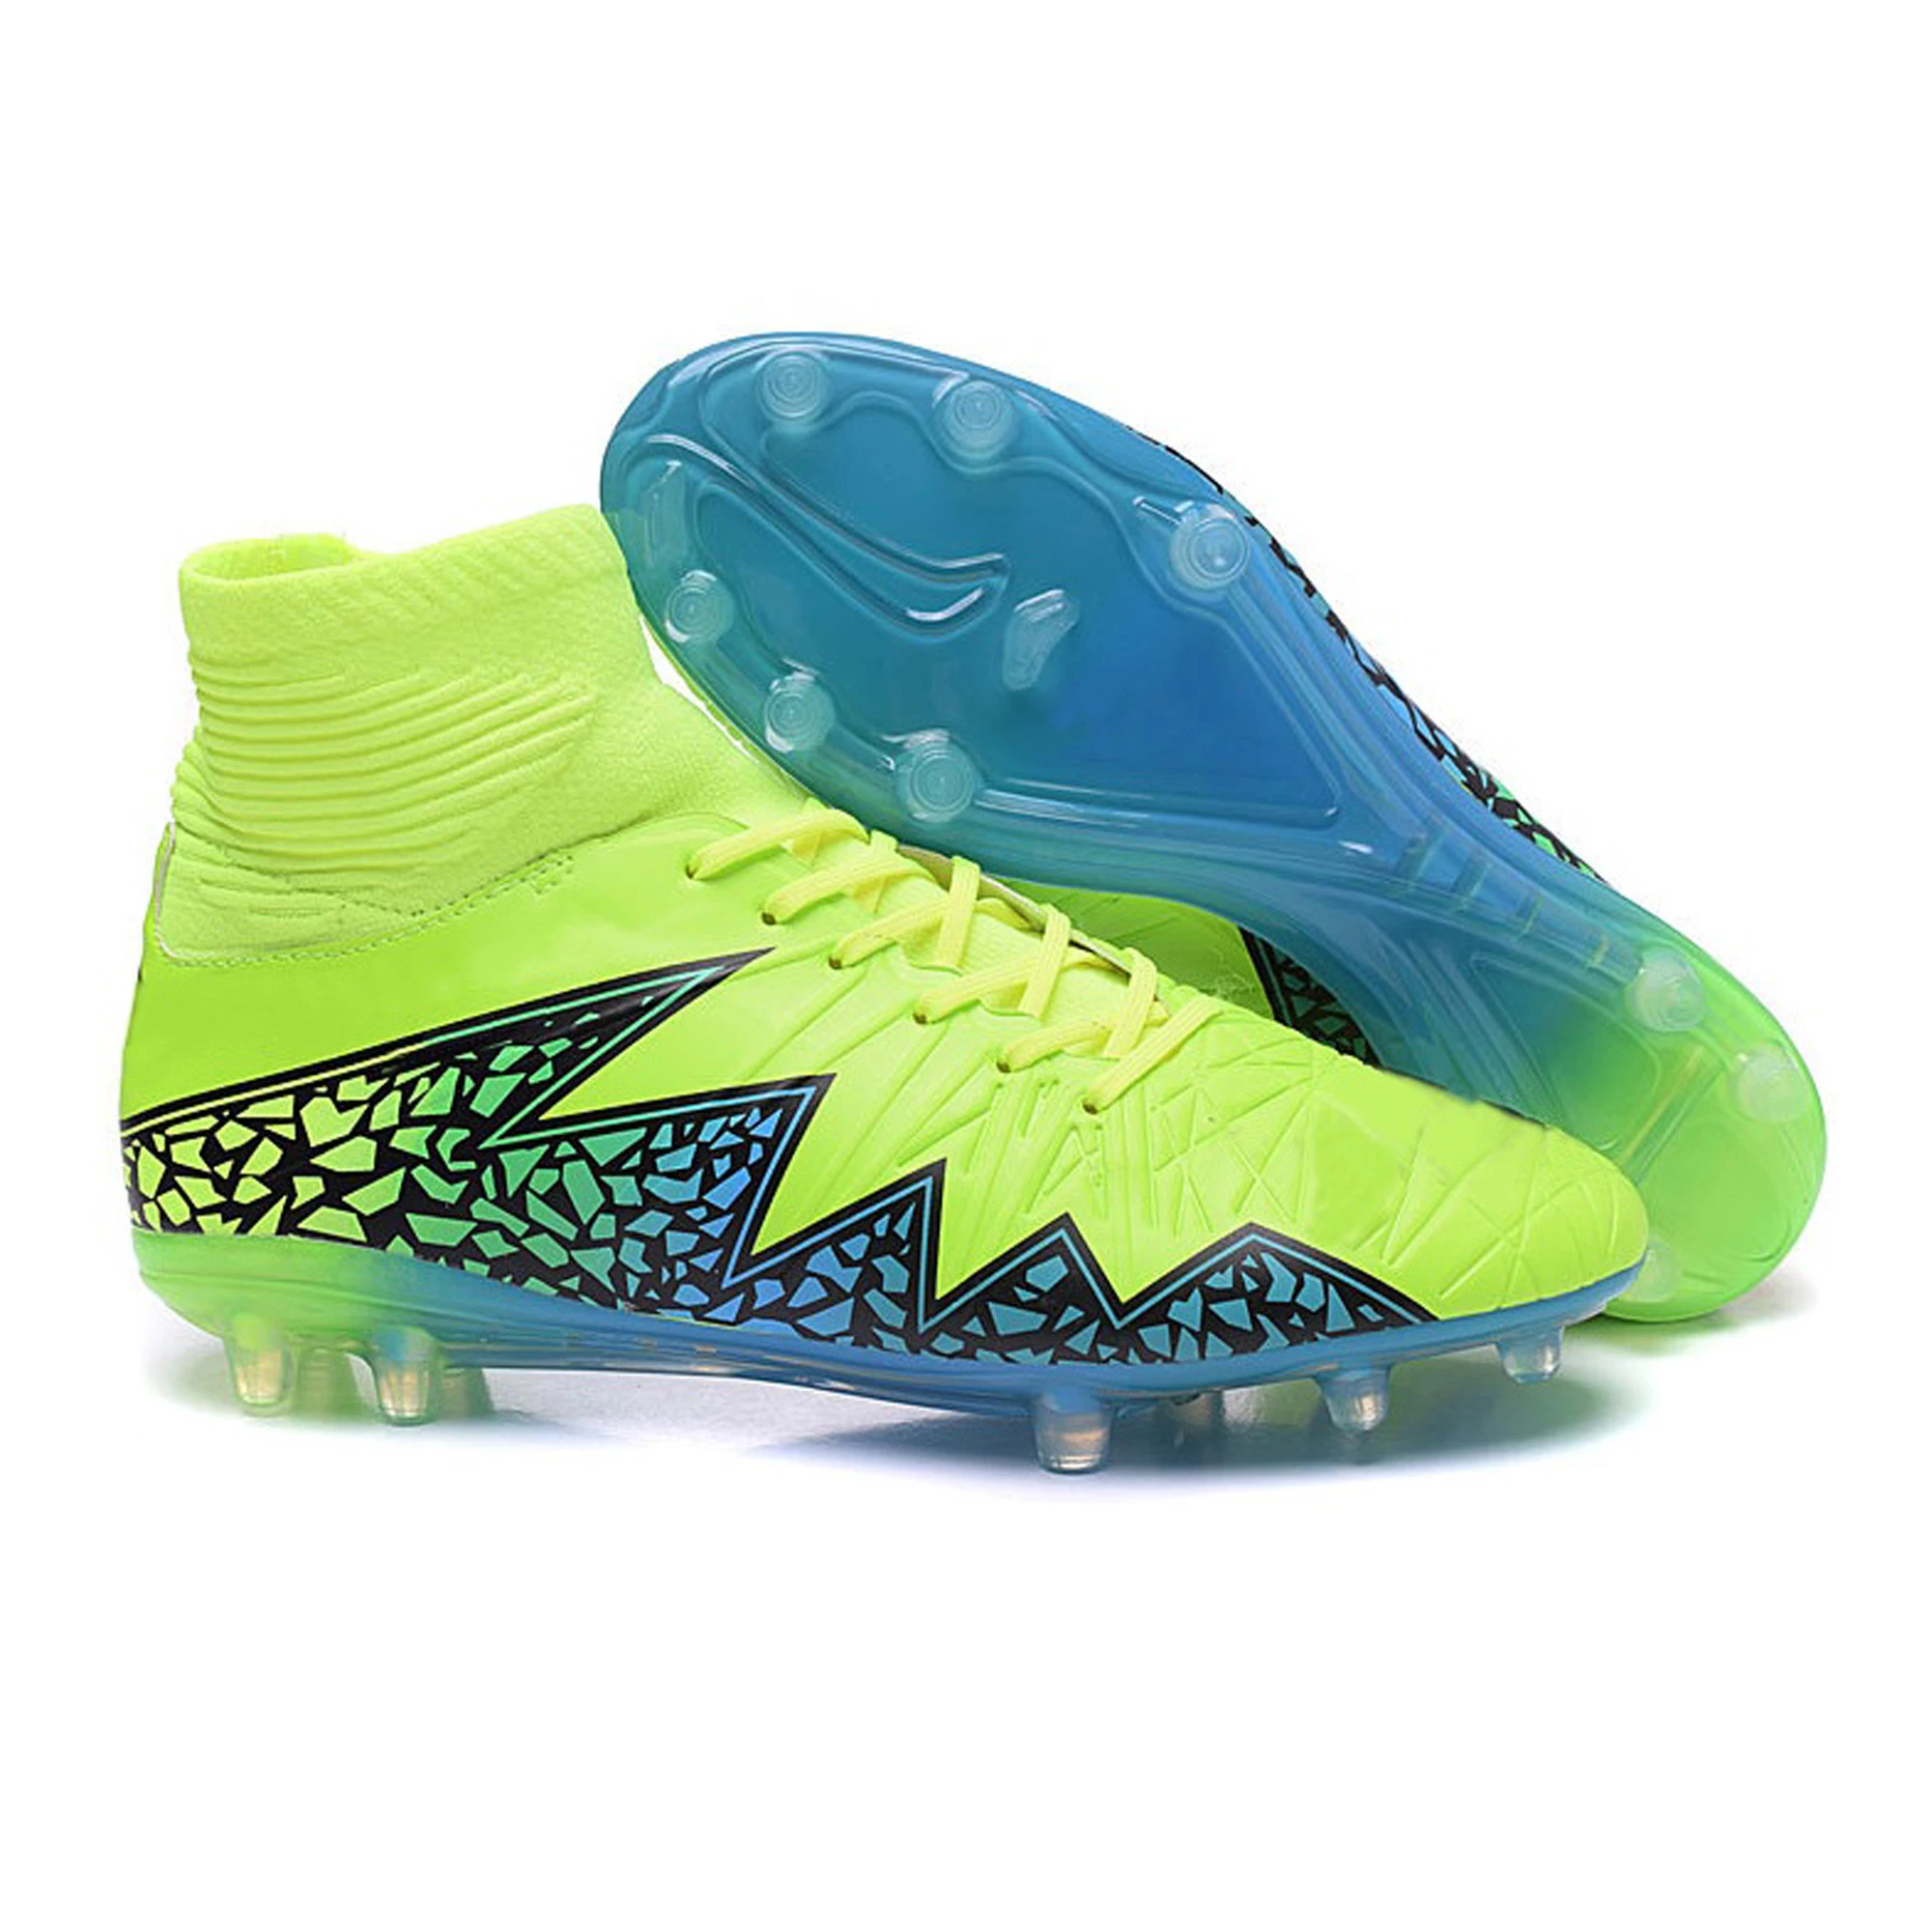 Hypervenom Soccer Cleats,Soccer Boots Brand Name,Brand Name Soccer Cleats - Buy Hypervenom Soccer Cleats,Soccer Brand Name,Brand Name Soccer Boots Product on Alibaba.com